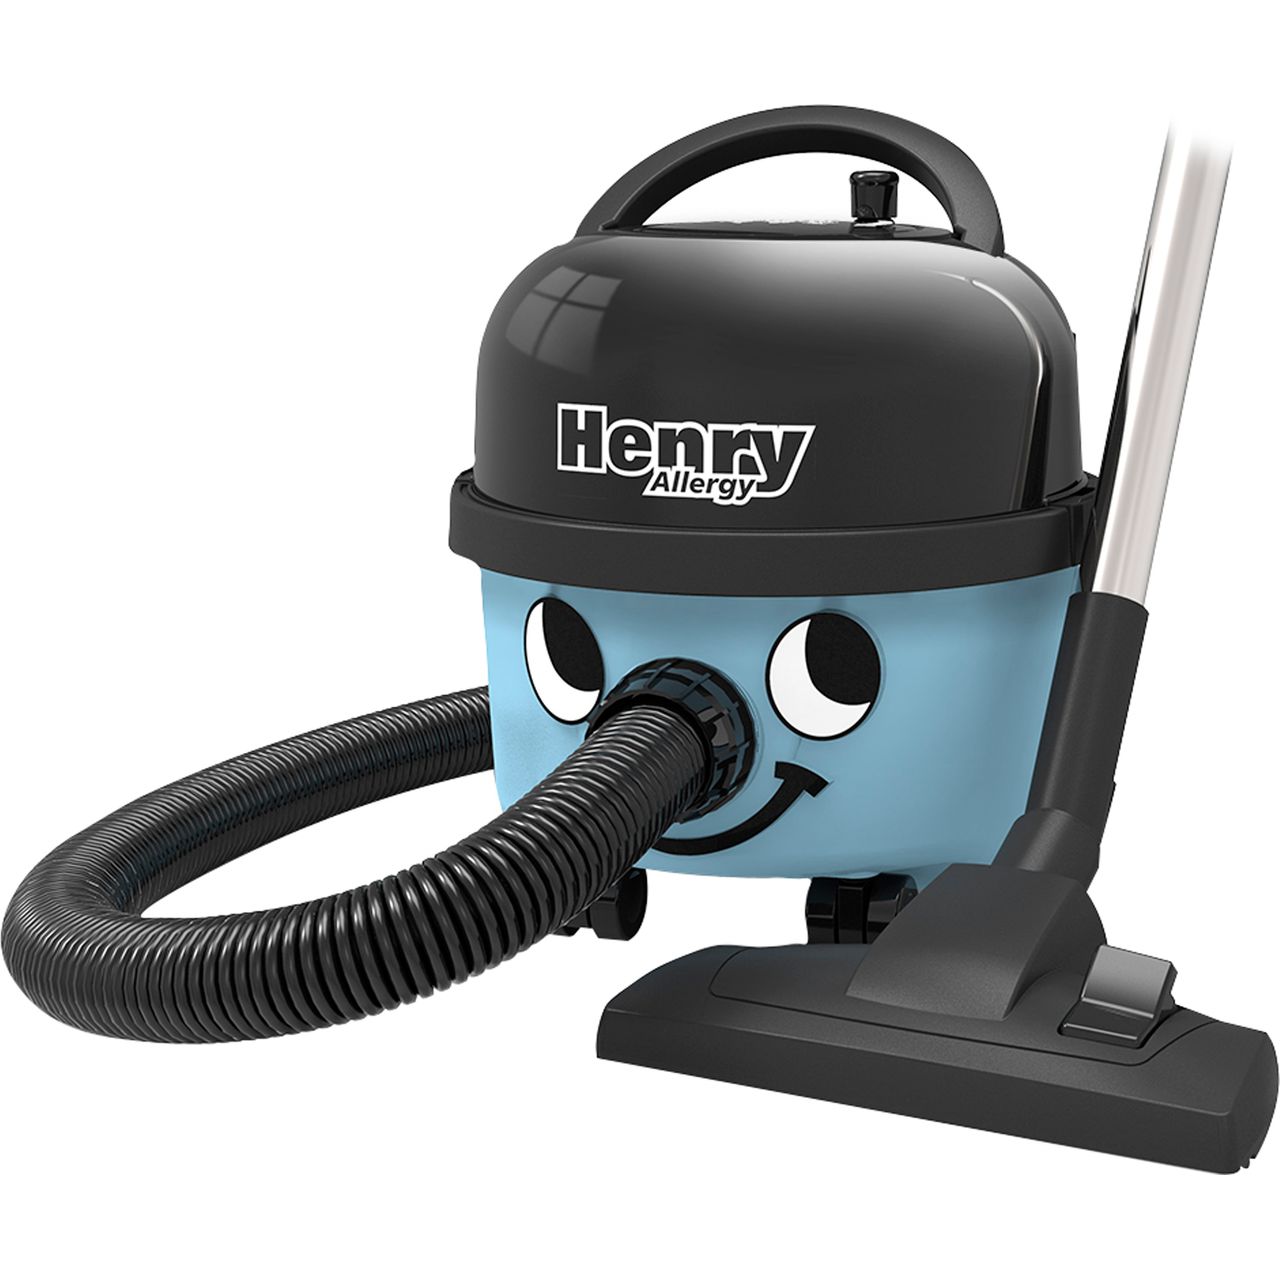 Henry Allergy 907641 Cylinder Vacuum Cleaner Review